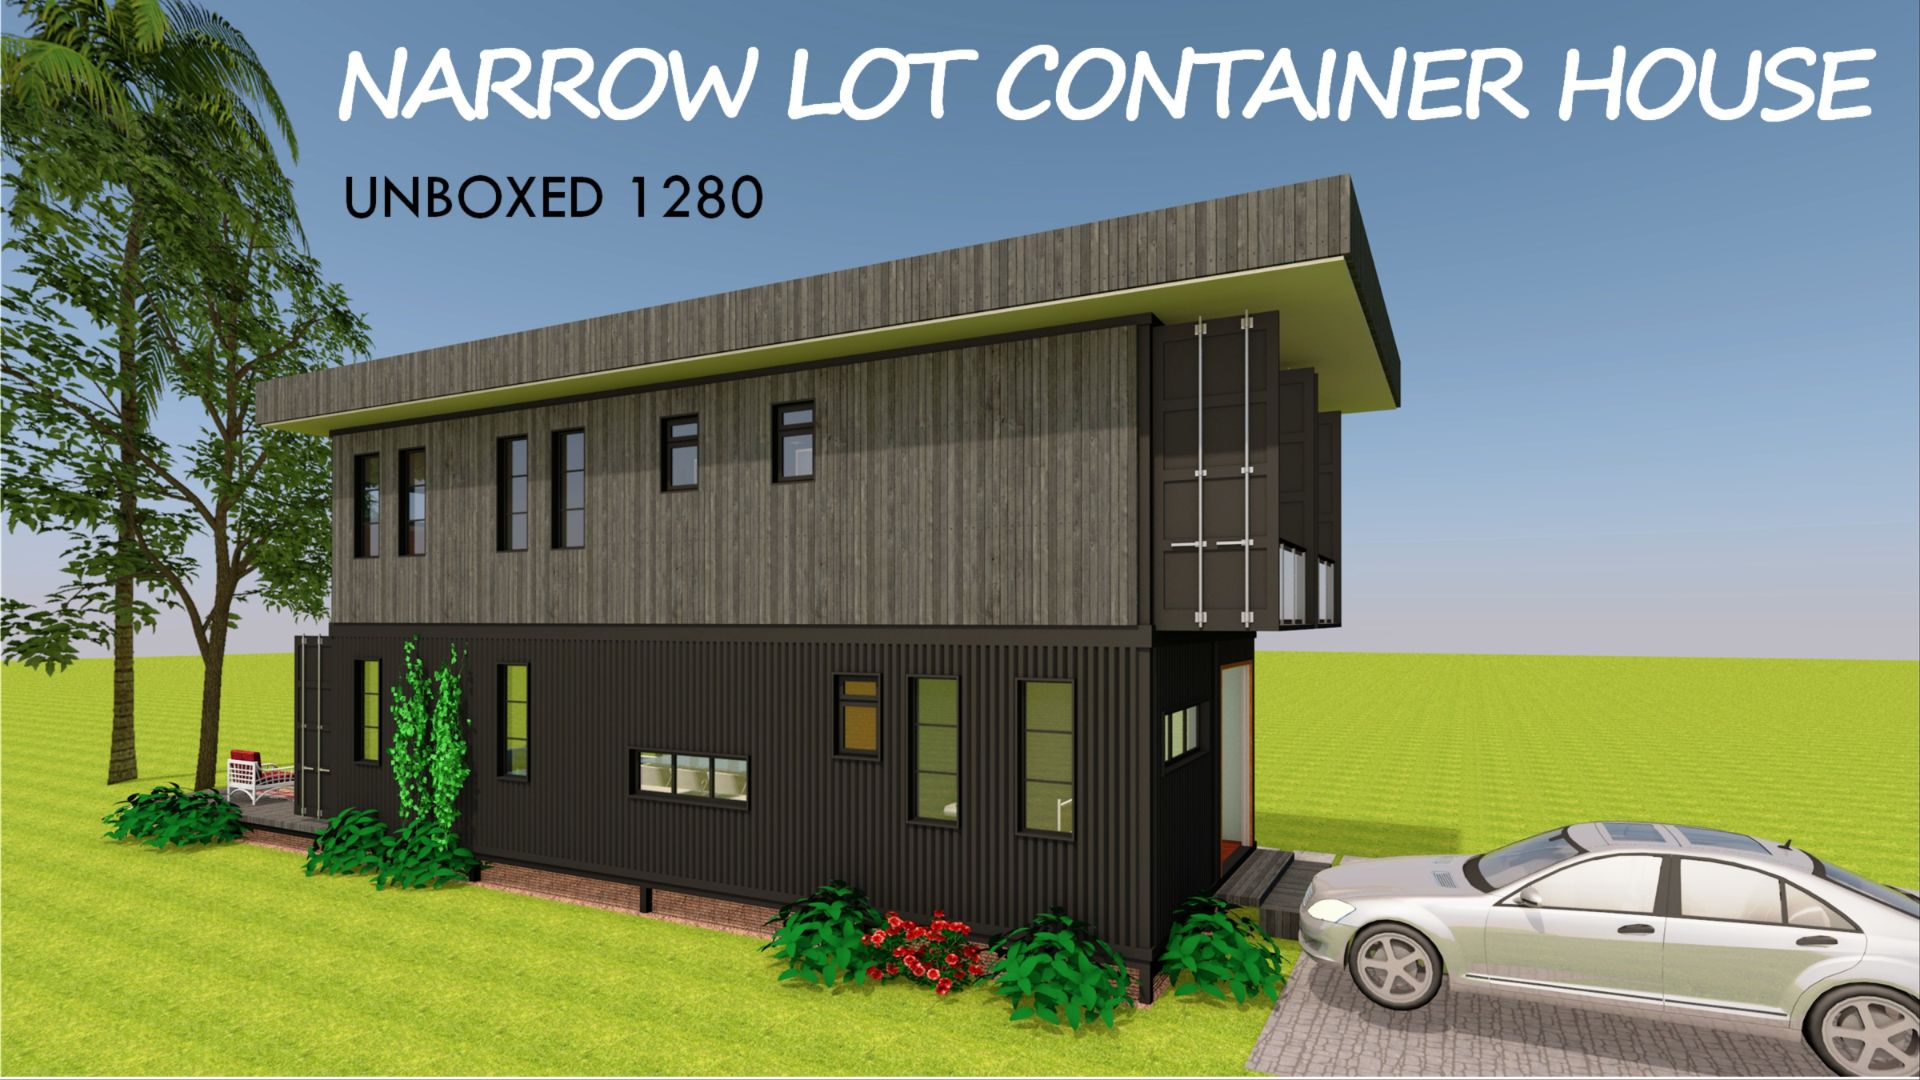 Shipping Container House Design Floor Plans for a Narrow Lot- UNBOXED 1280